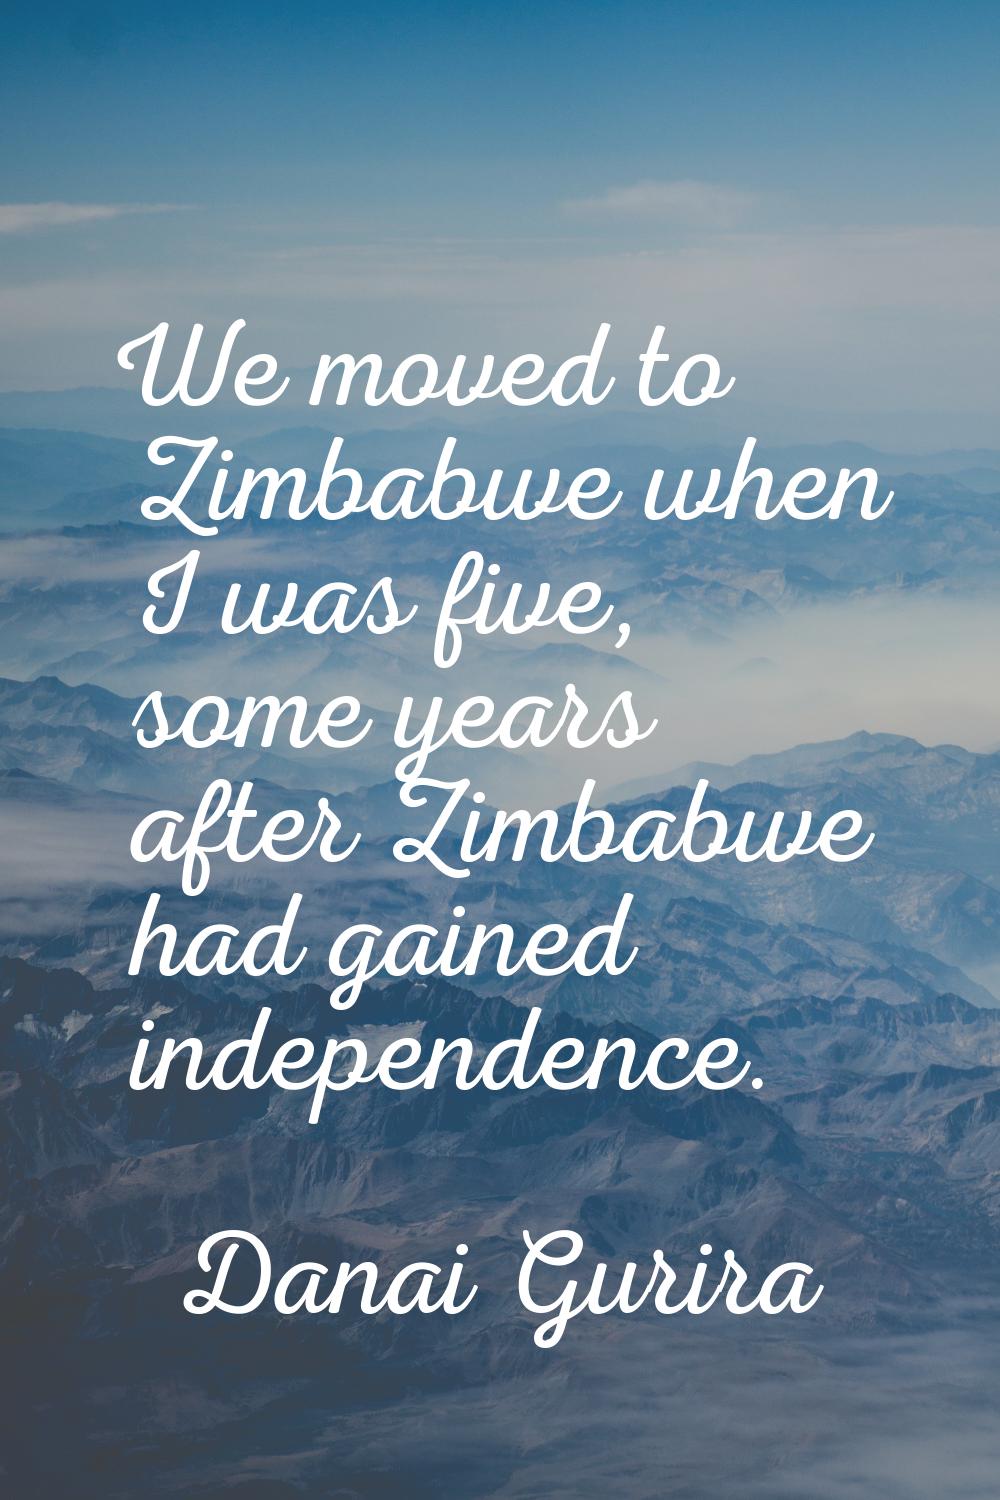 We moved to Zimbabwe when I was five, some years after Zimbabwe had gained independence.